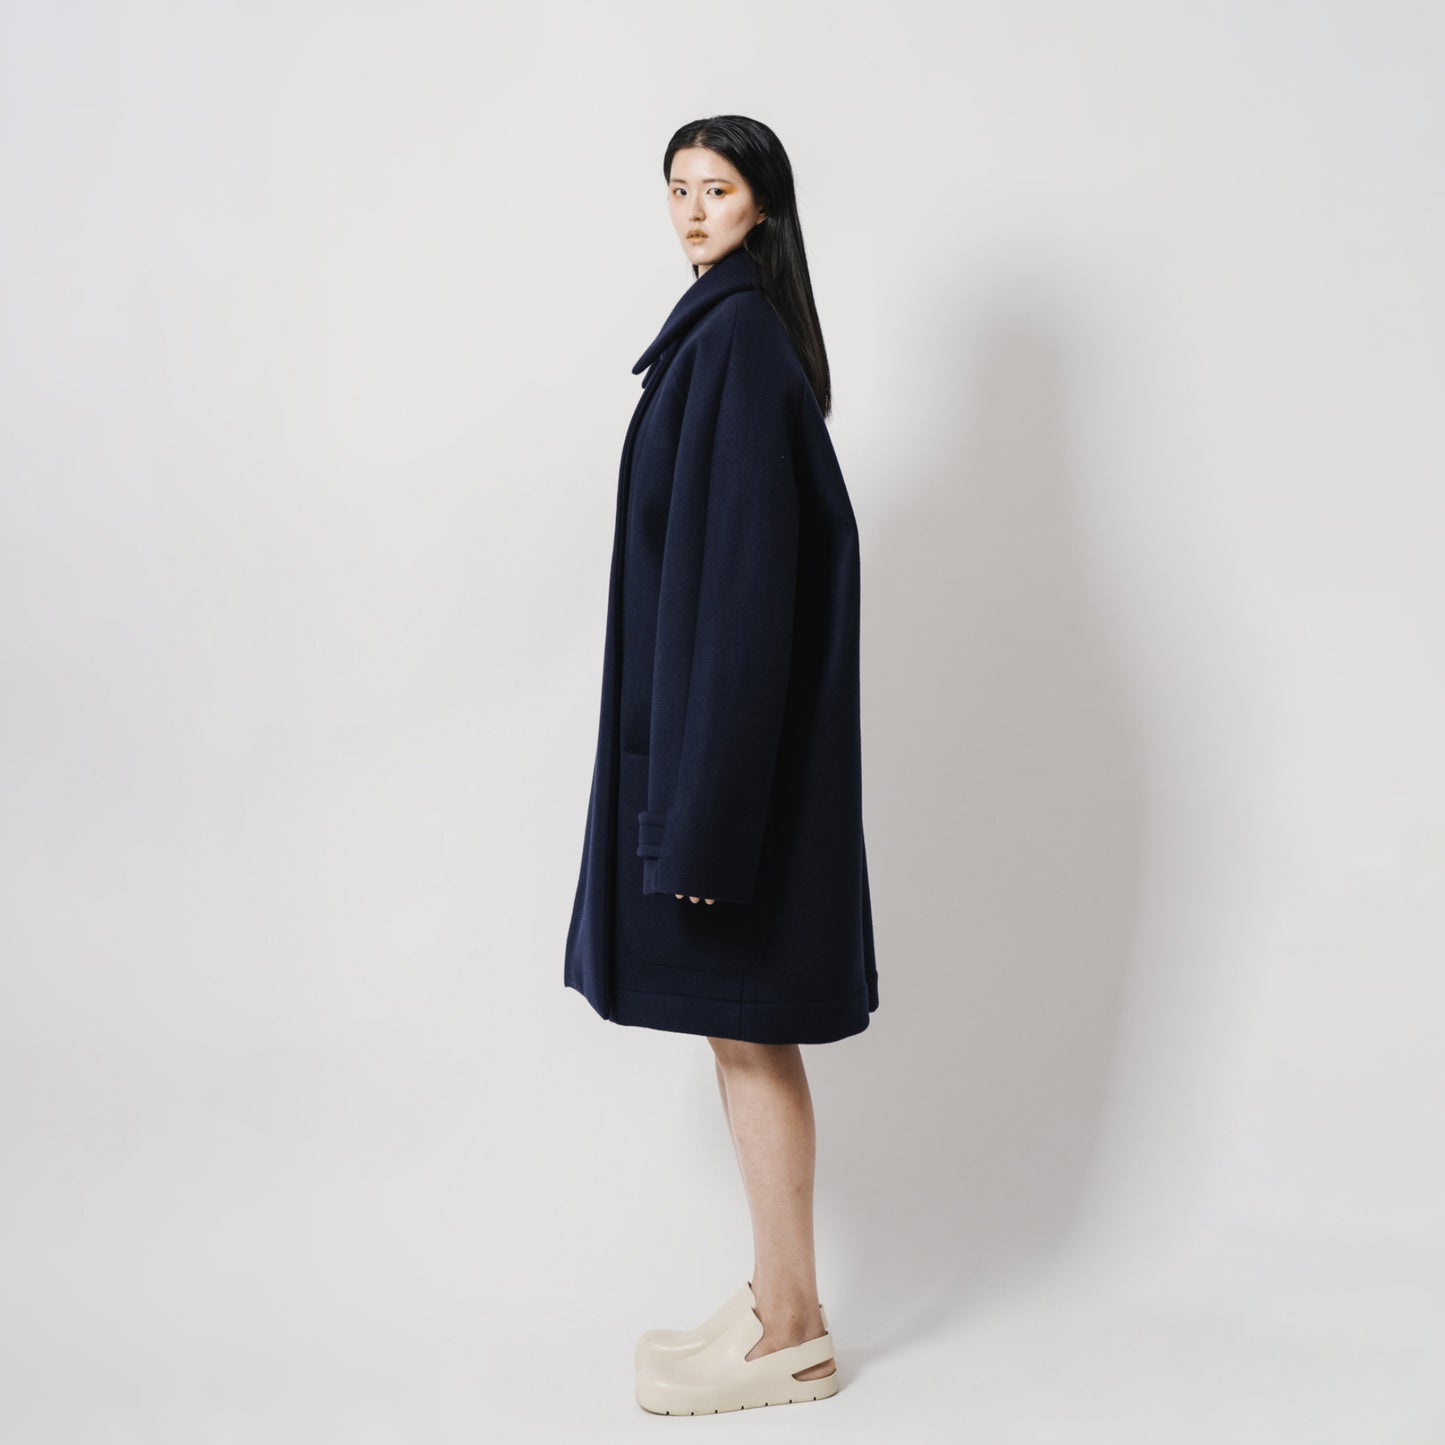 Oversize Navy Blue Neoprene Coat with oversize front pockets. Oversize Fit. Side view.